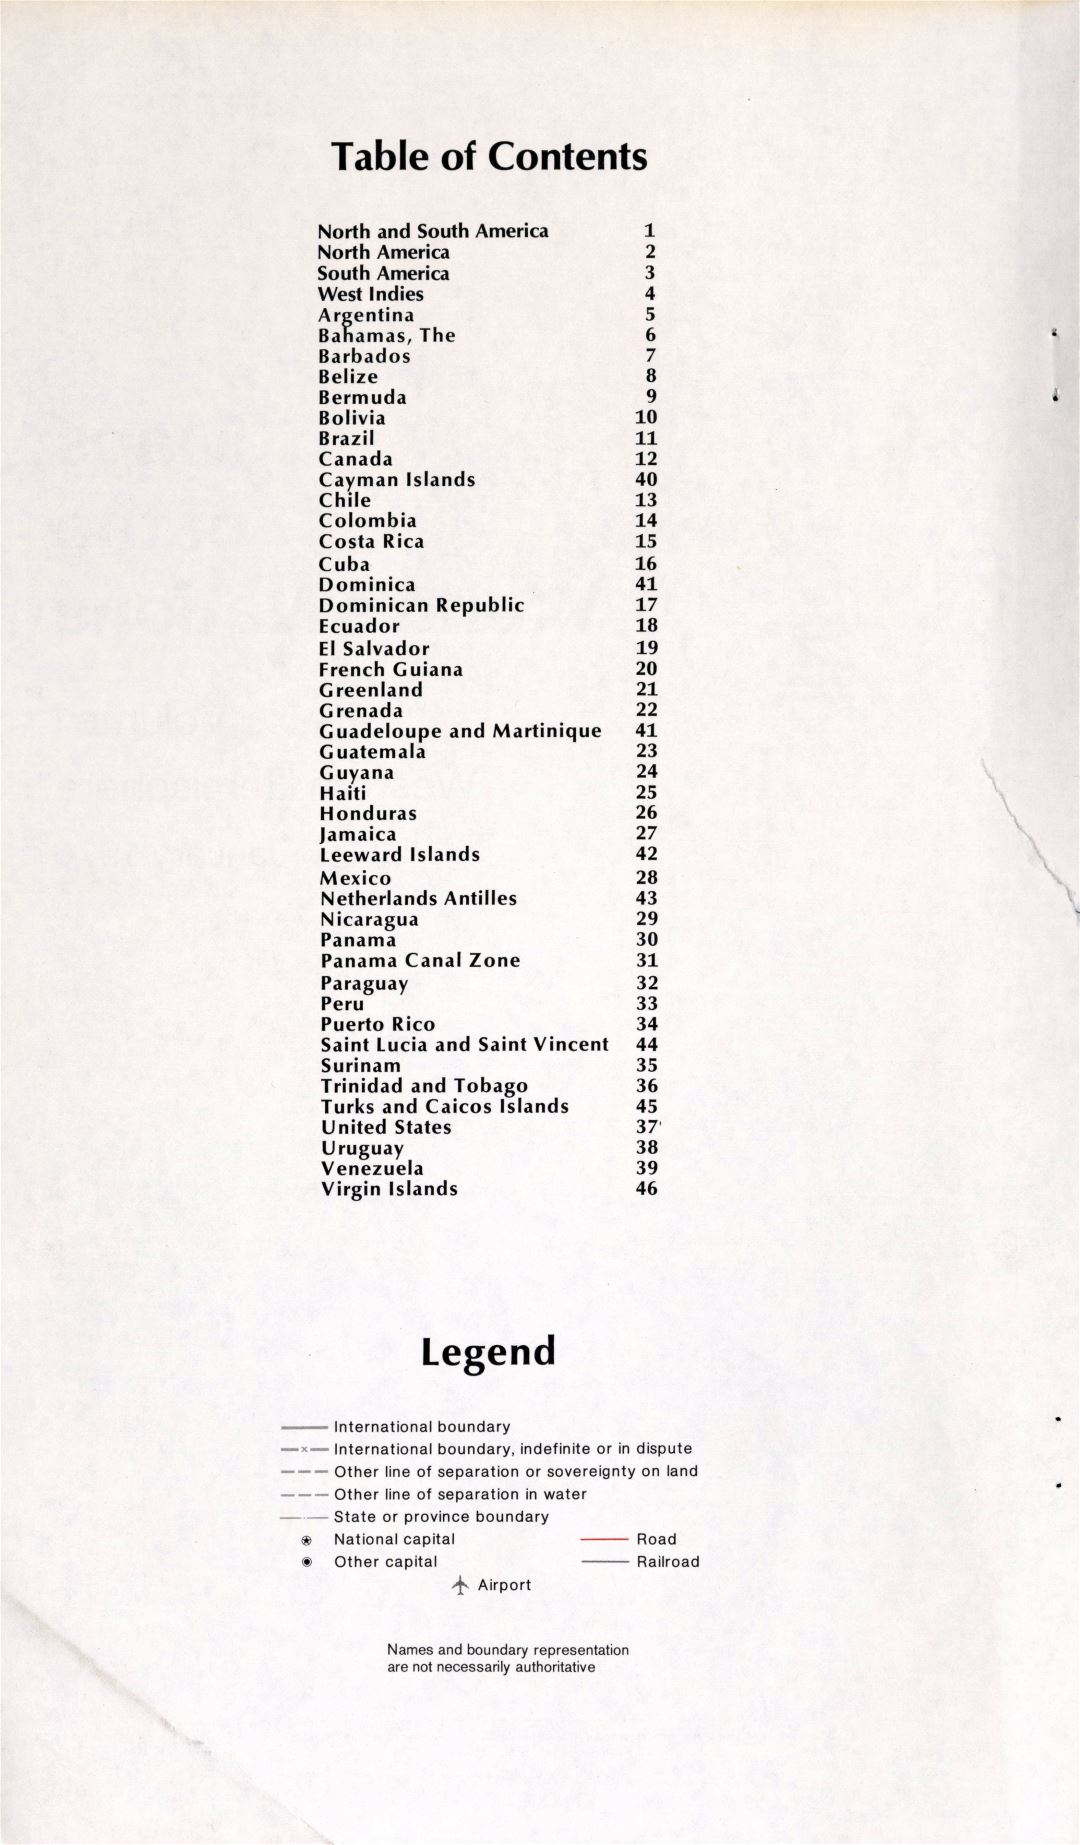 Maps of the World's Nations - Western Hemisphere (table of contents and legend)